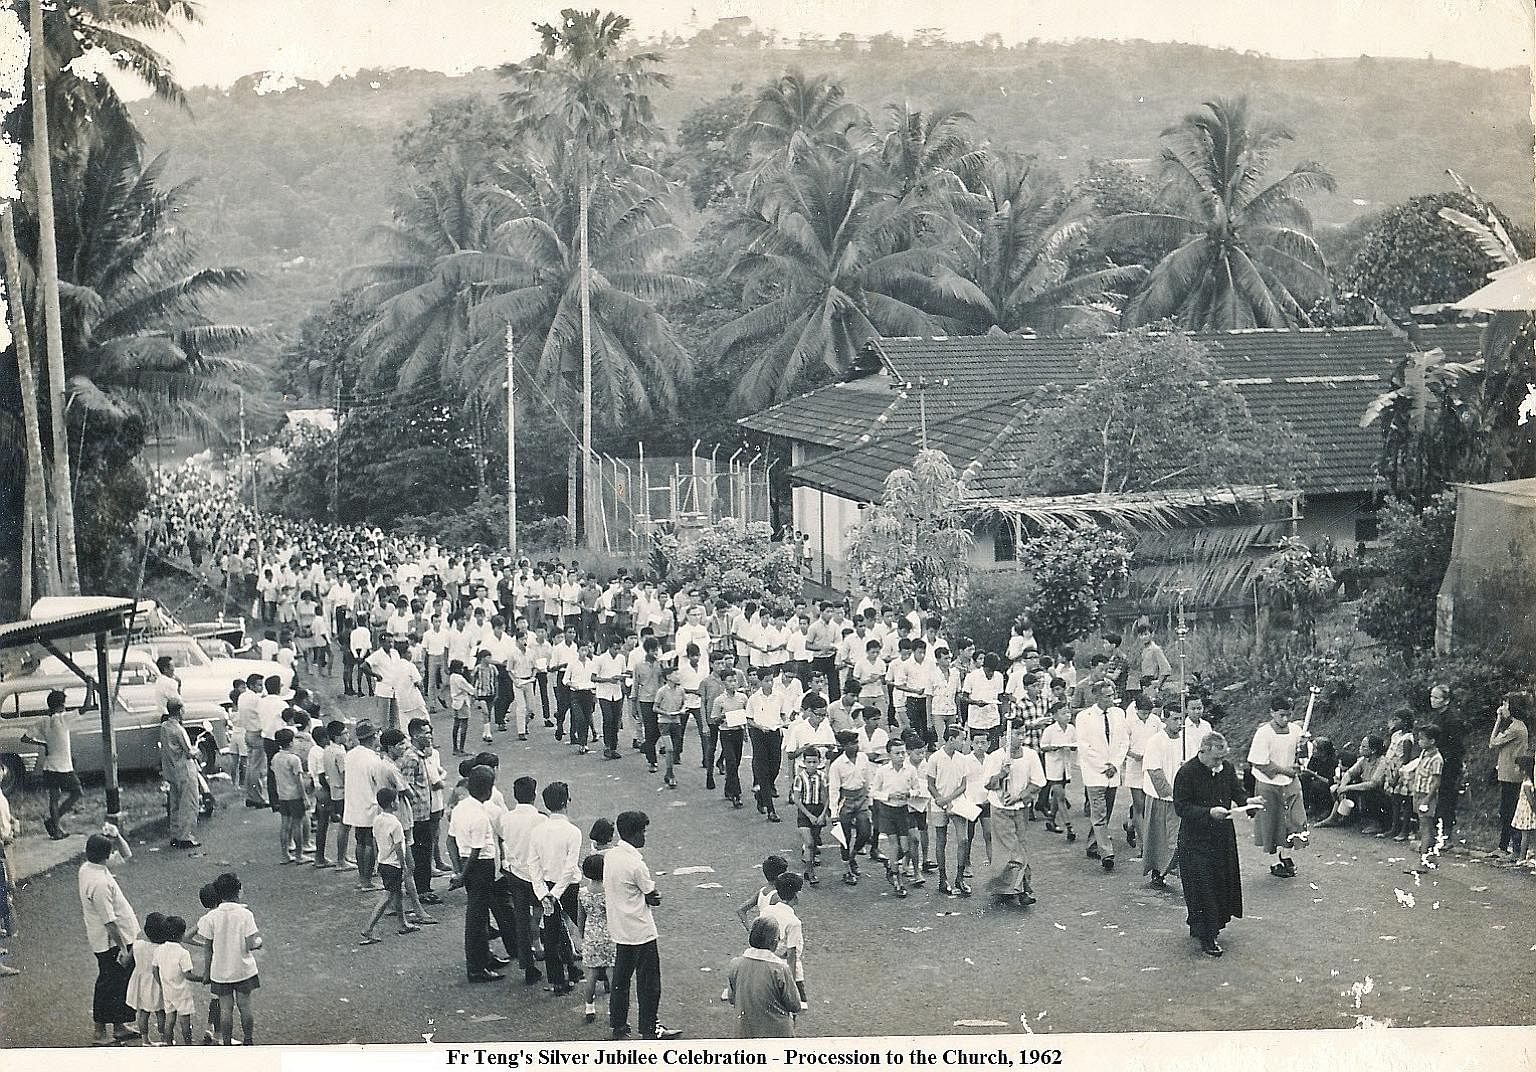 Father Teng leading parishioners in a procession to the church in 1962 to celebrate his Silver Jubilee.